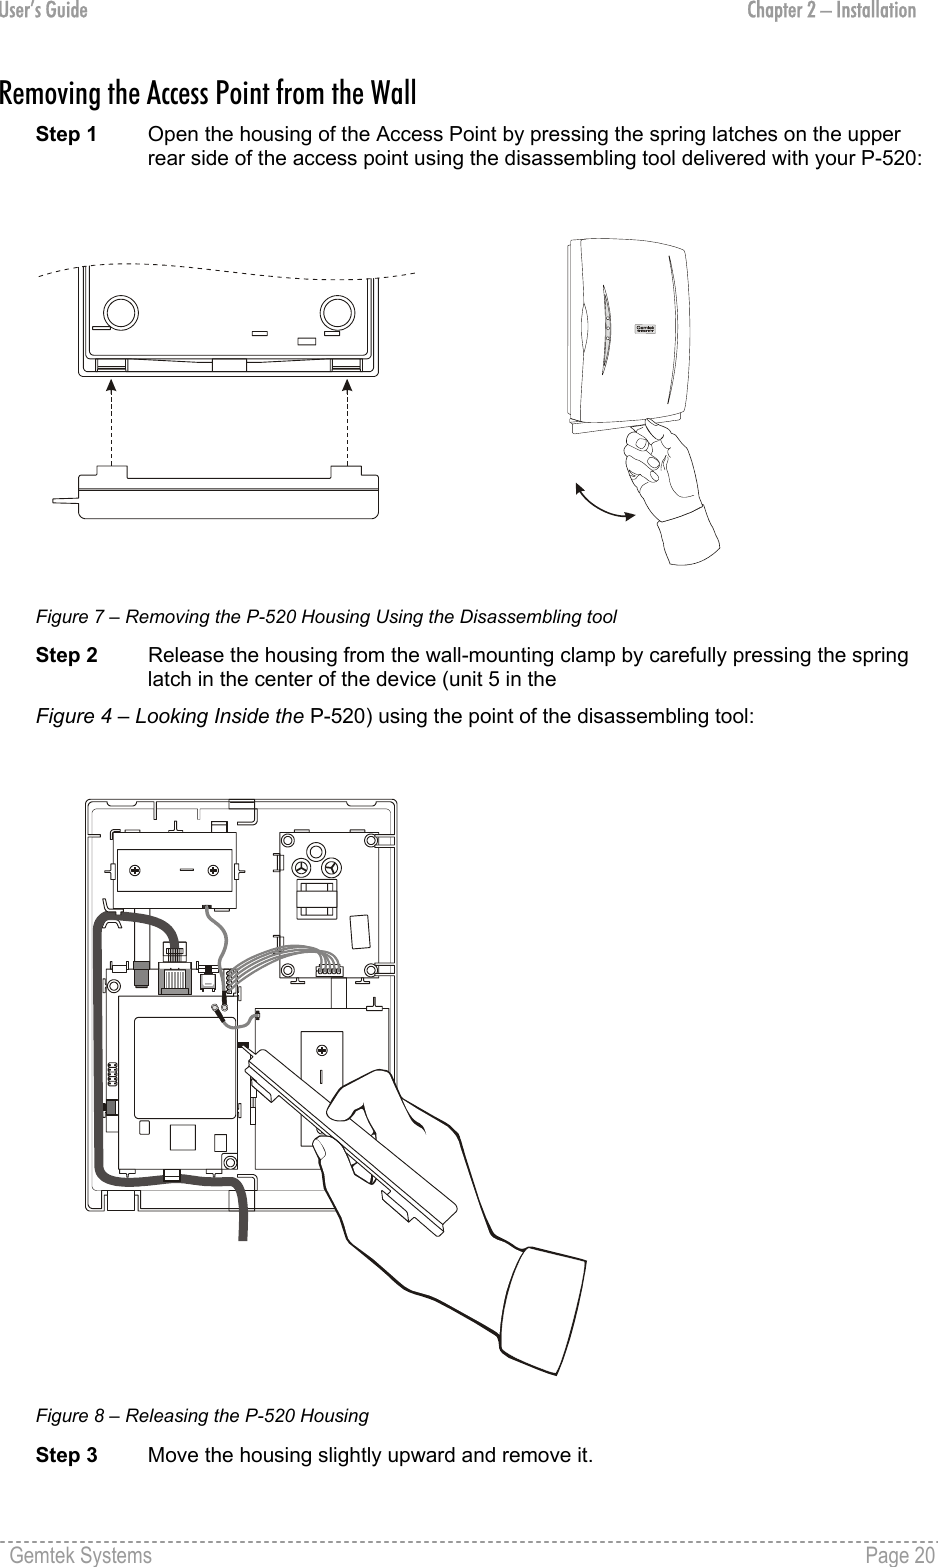 User’s Guide  Chapter 2 – Installation Removing the Access Point from the Wall Step 1  Open the housing of the Access Point by pressing the spring latches on the upper rear side of the access point using the disassembling tool delivered with your P-520:  Figure 7 – Removing the P-520 Housing Using the Disassembling tool Step 2  Release the housing from the wall-mounting clamp by carefully pressing the spring latch in the center of the device (unit 5 in the  Figure 4 – Looking Inside the P-520) using the point of the disassembling tool:  Figure 8 – Releasing the P-520 Housing Step 3  Move the housing slightly upward and remove it. Gemtek Systems    Page 20  